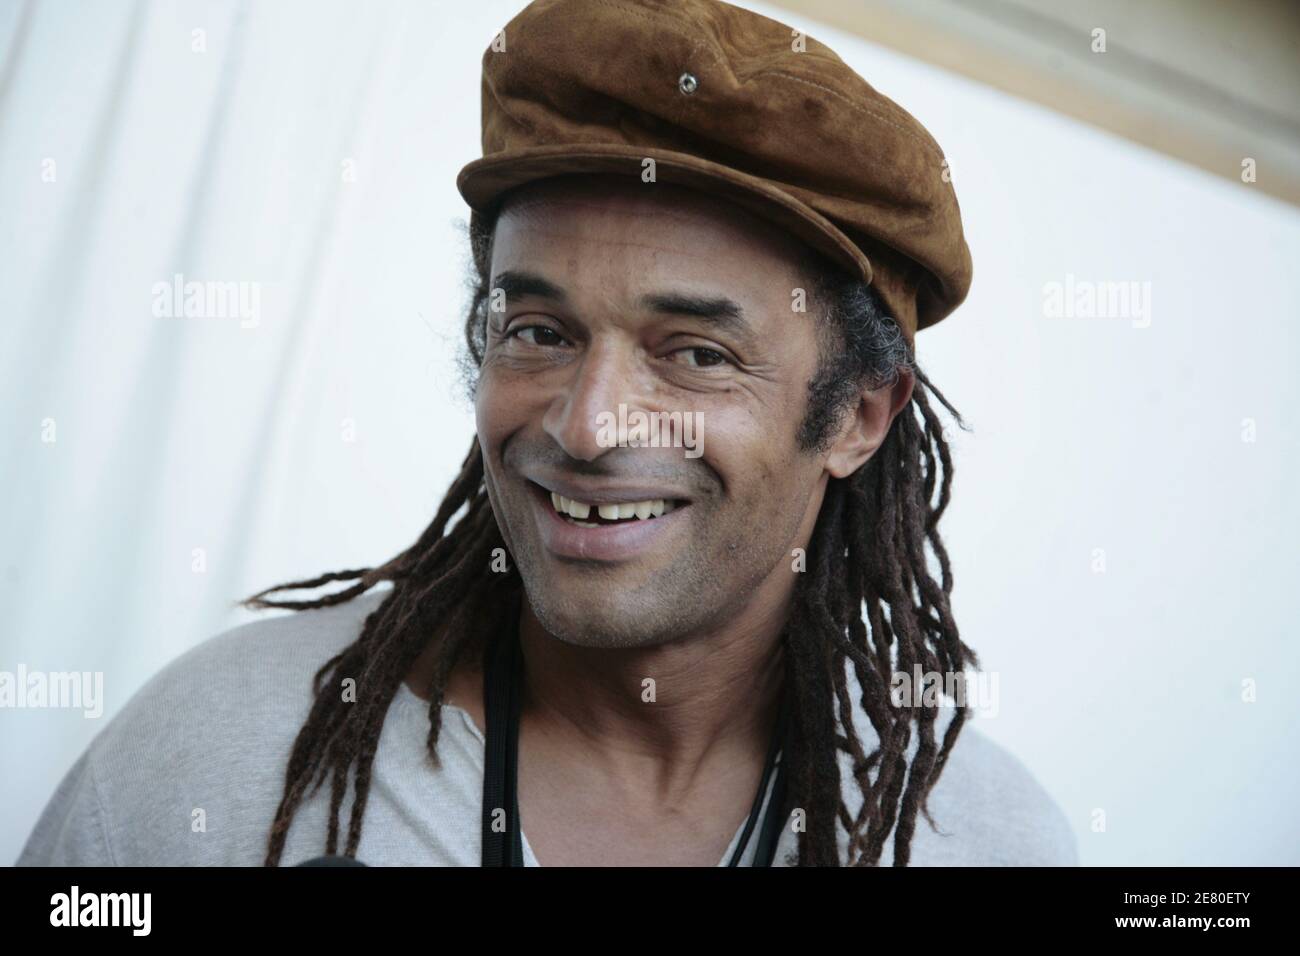 French singer Yannick Noah, backstage during French Socialist Party  presidential candidate Segolene Royal's meeting at the Charlety stadium in  Paris, France, on May 01, 2007. Photo by  DeRusse/Bisson/Orban/ABACAPRESS.COM Stock Photo - Alamy